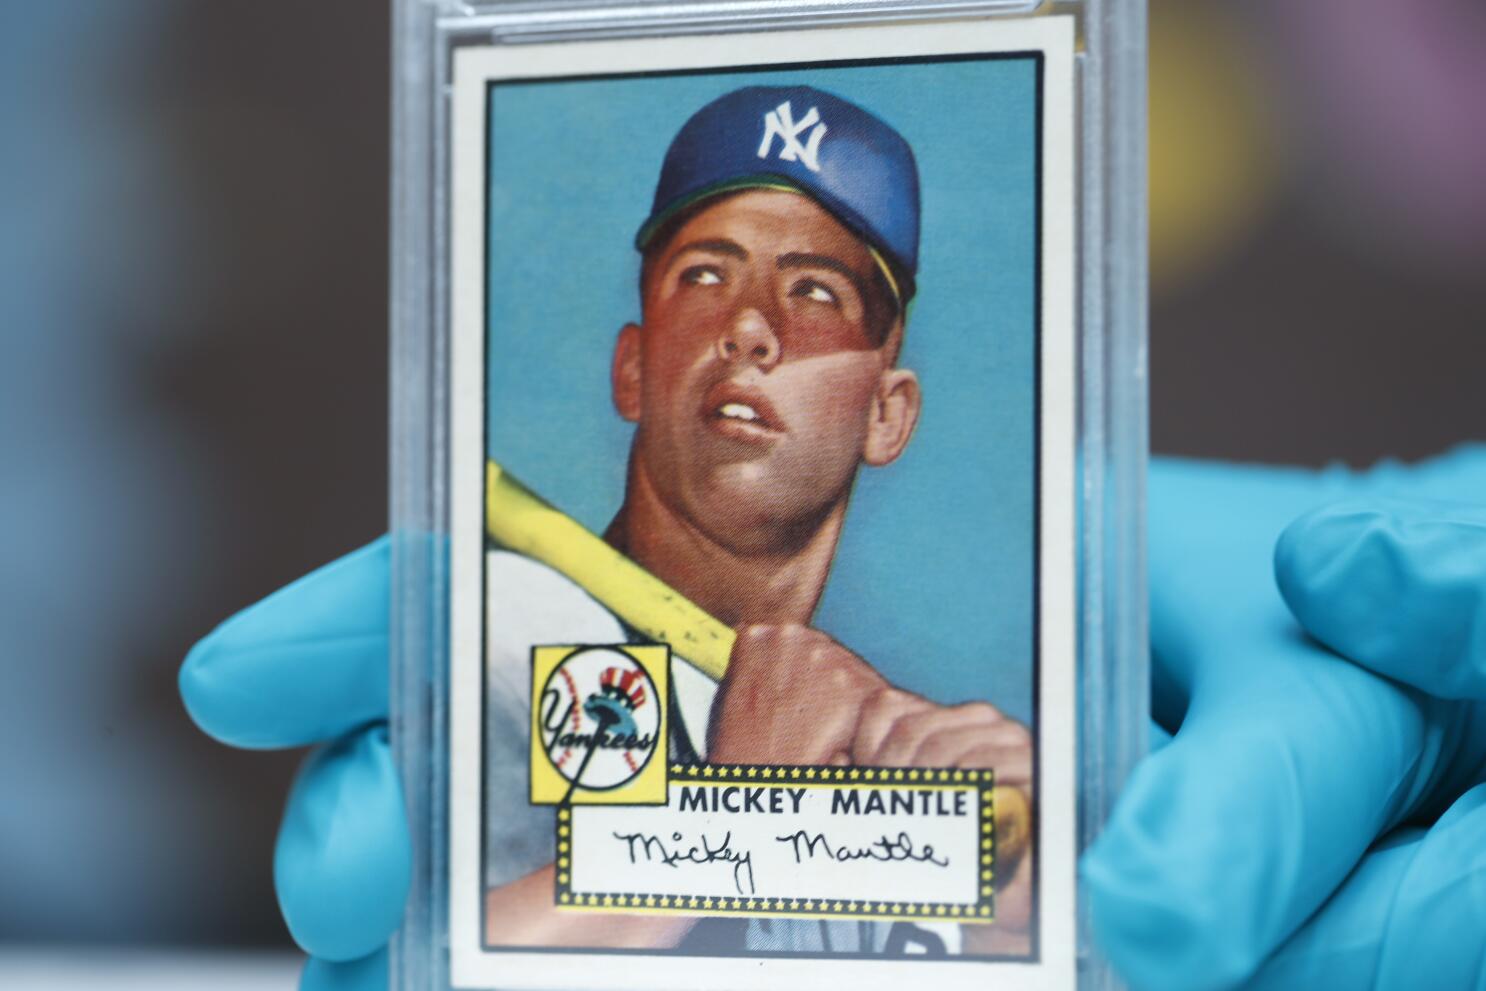 Mickey Mantle Card Breaks Sports Memorabilia Record by Selling for